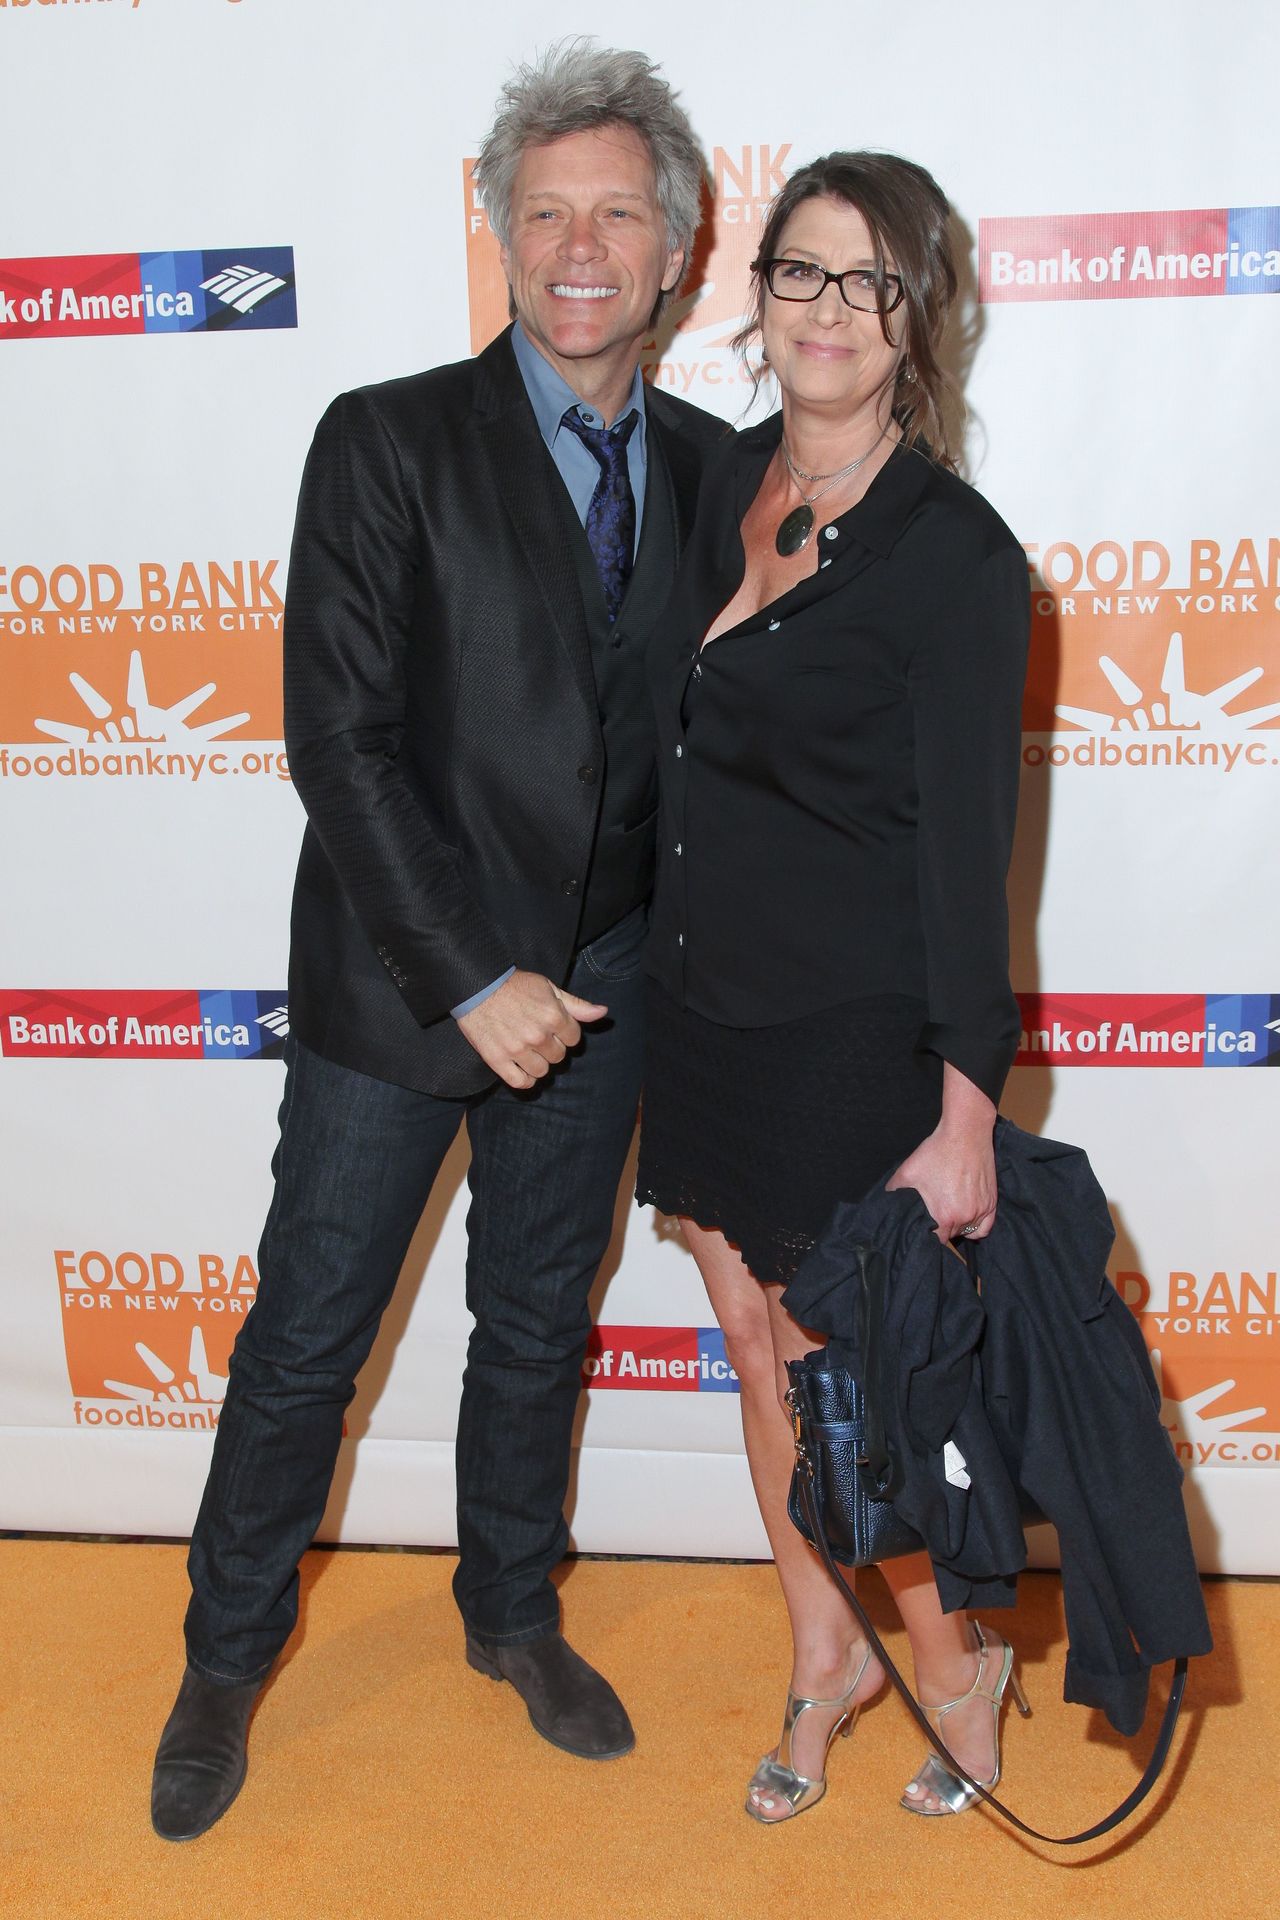 Jon Bon Jovi and his wife, Dorothea Hurley, attend the Food Bank for New York City Can-Do Awards Dinner at Cipriani Wall Street in New York on April 20.